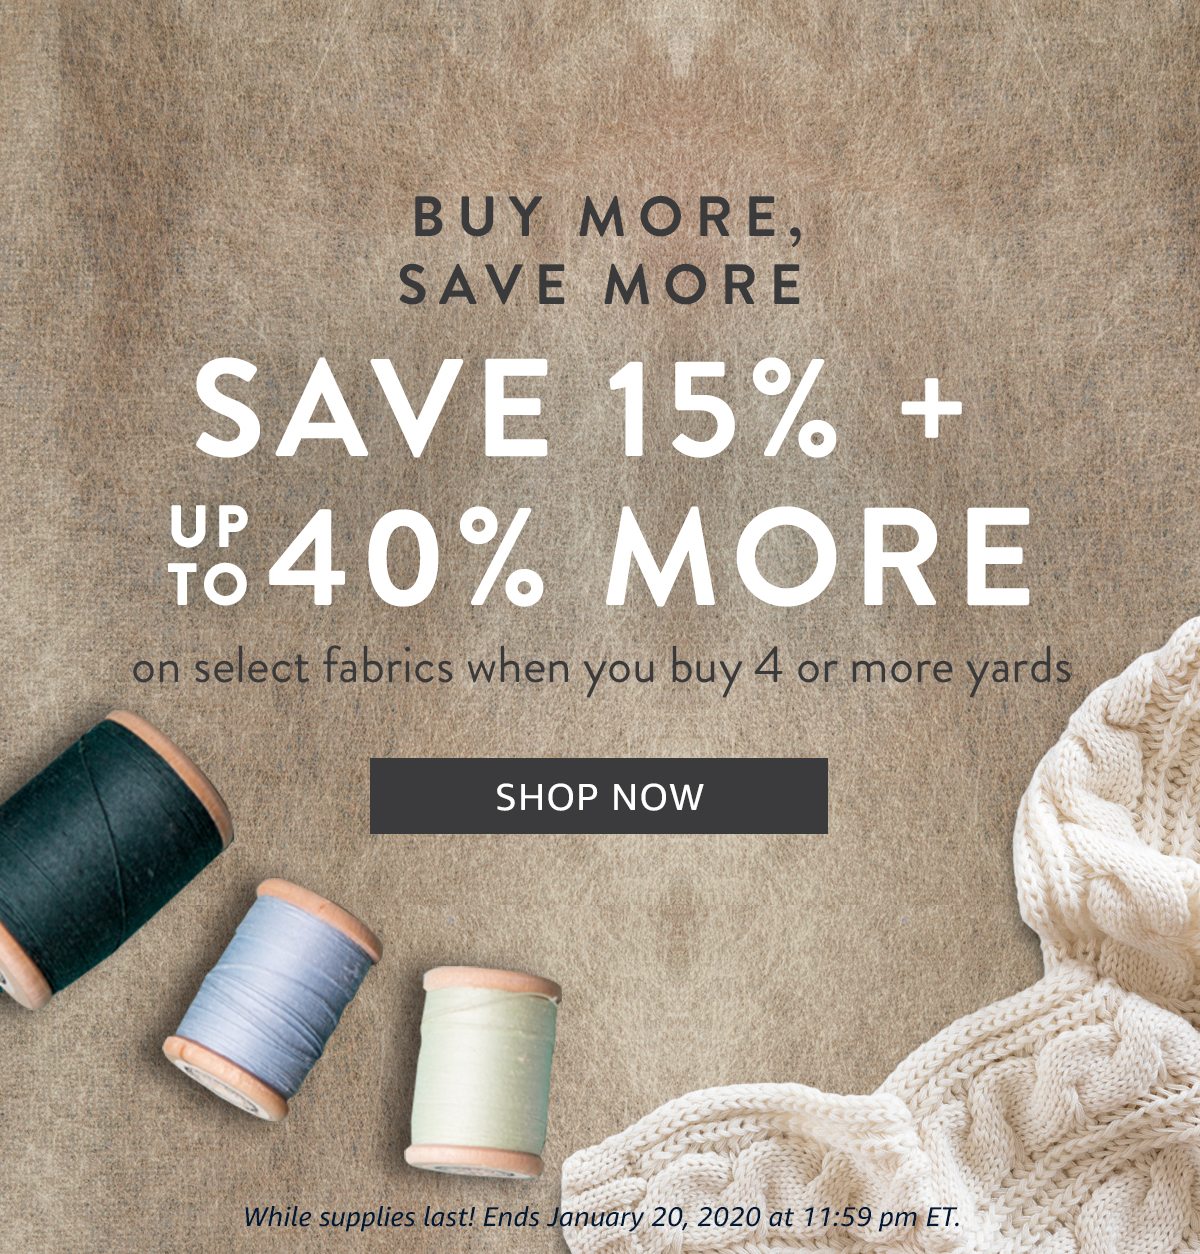 BUY MORE, SAVE MORE | SHOP NOW | Ends 1/20/20 at 11:59 pm ET.